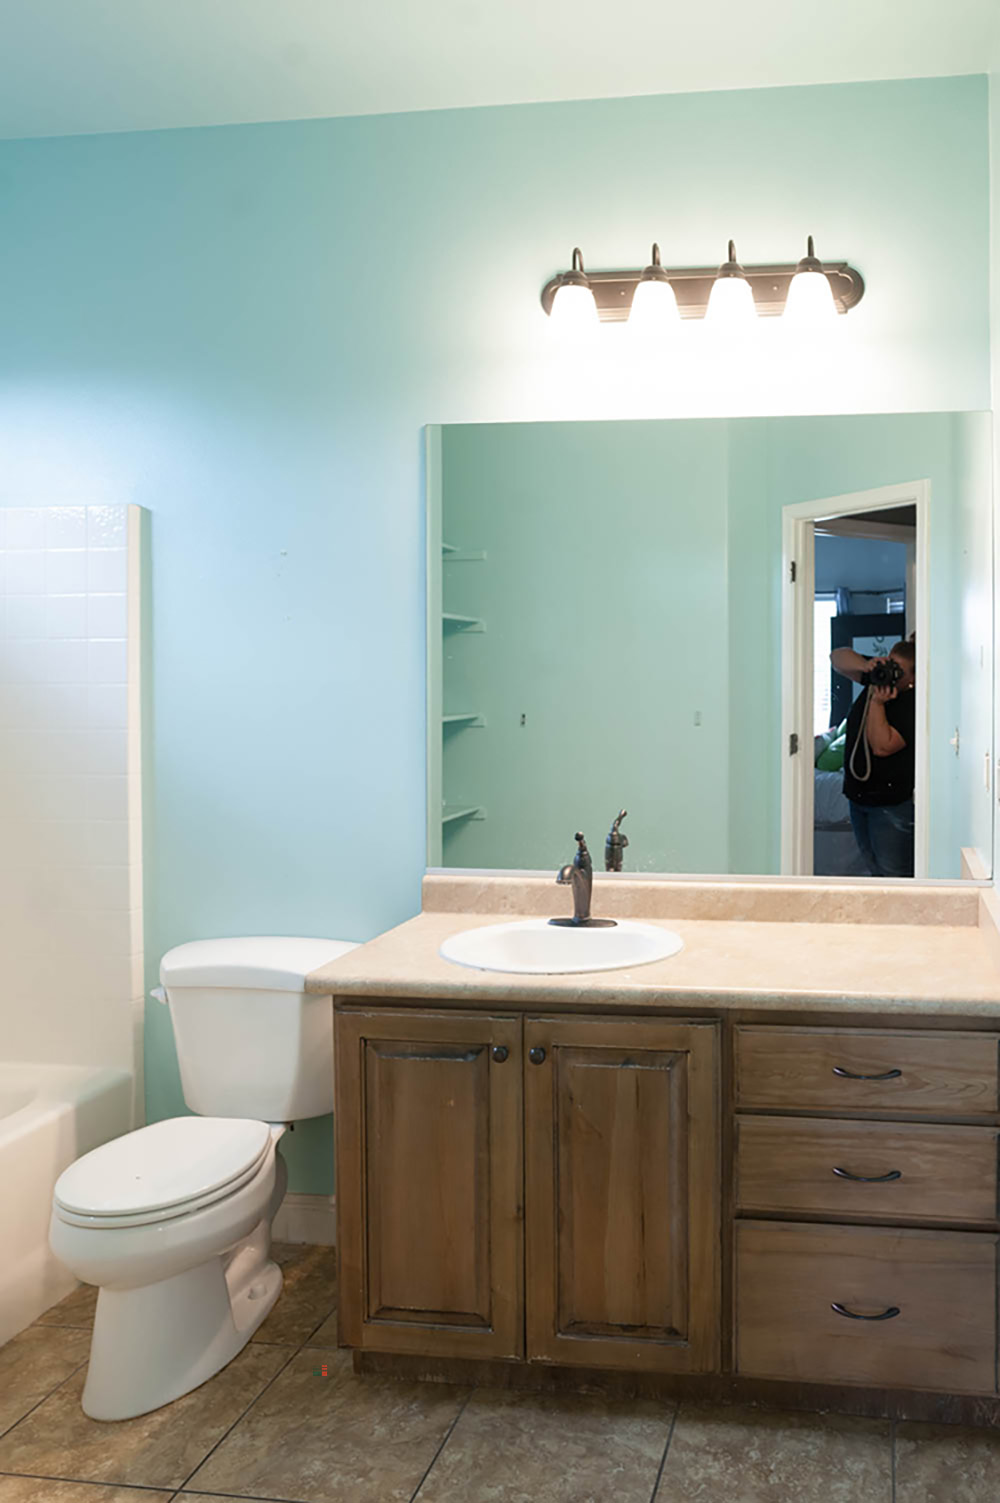 A bathroom with teal walls, brown floors, and an older wooden vanity.